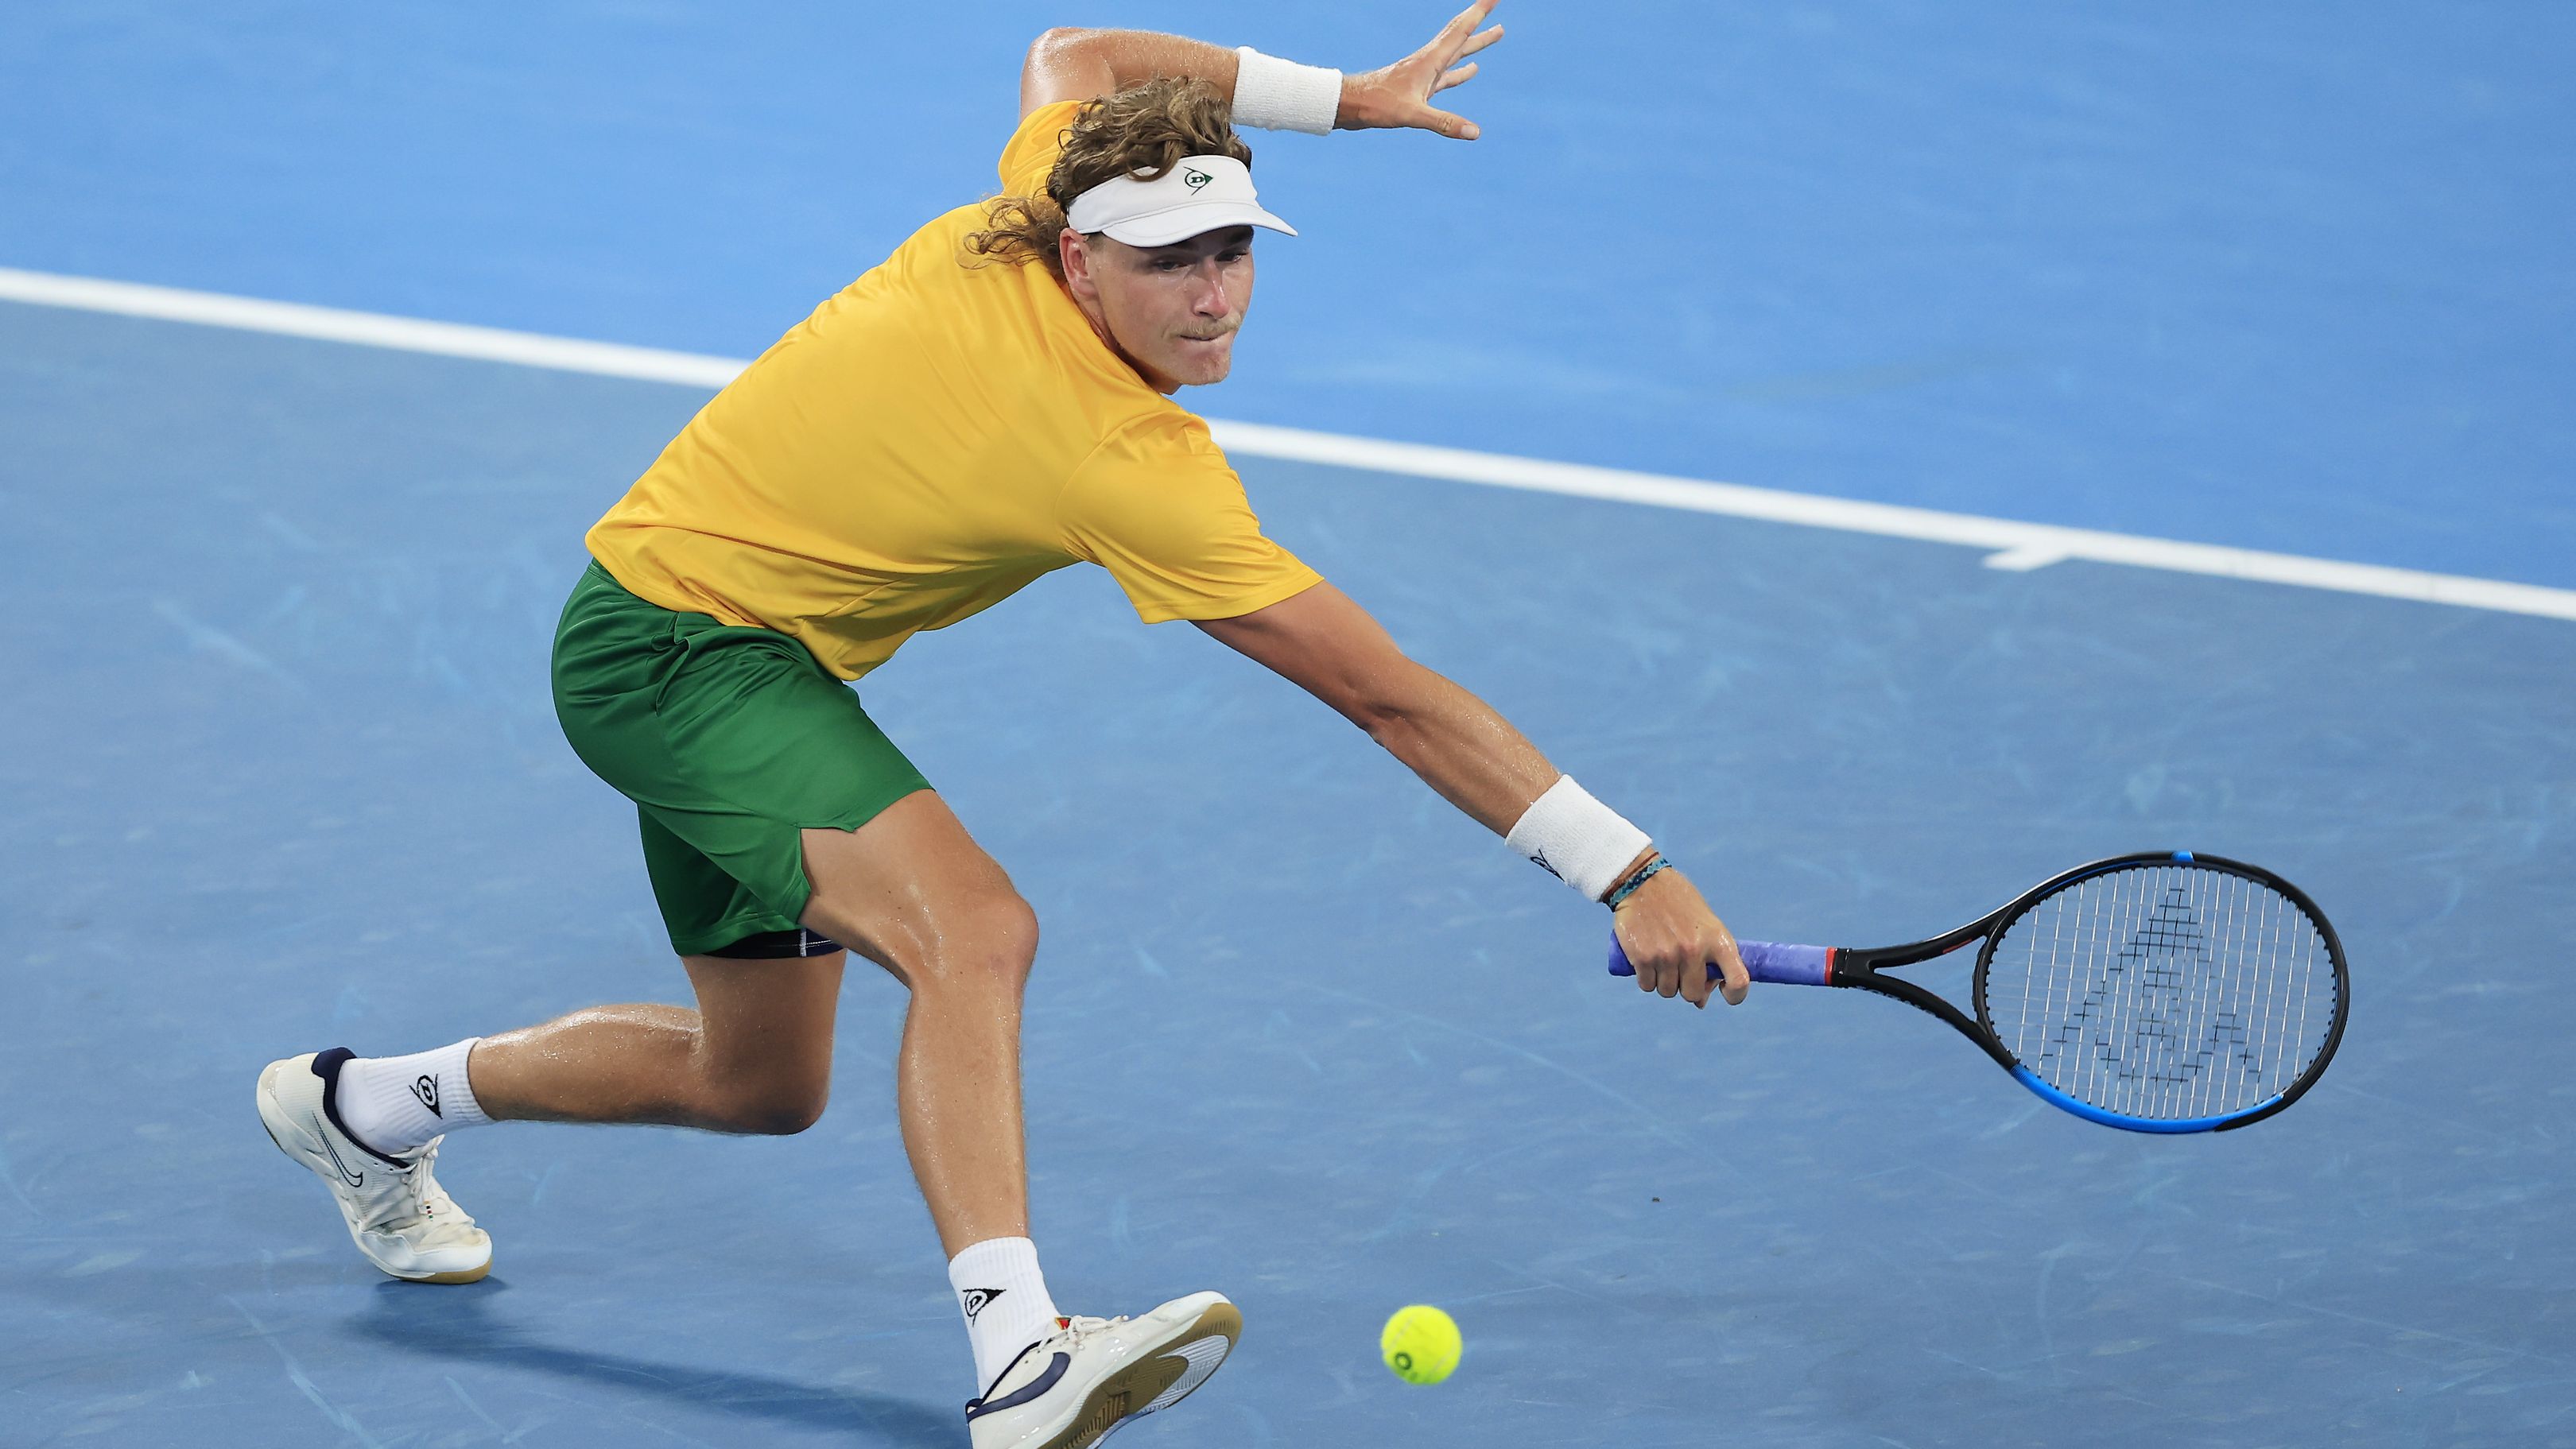 Team Aus looking to join victors US, Russia at ATP Cup